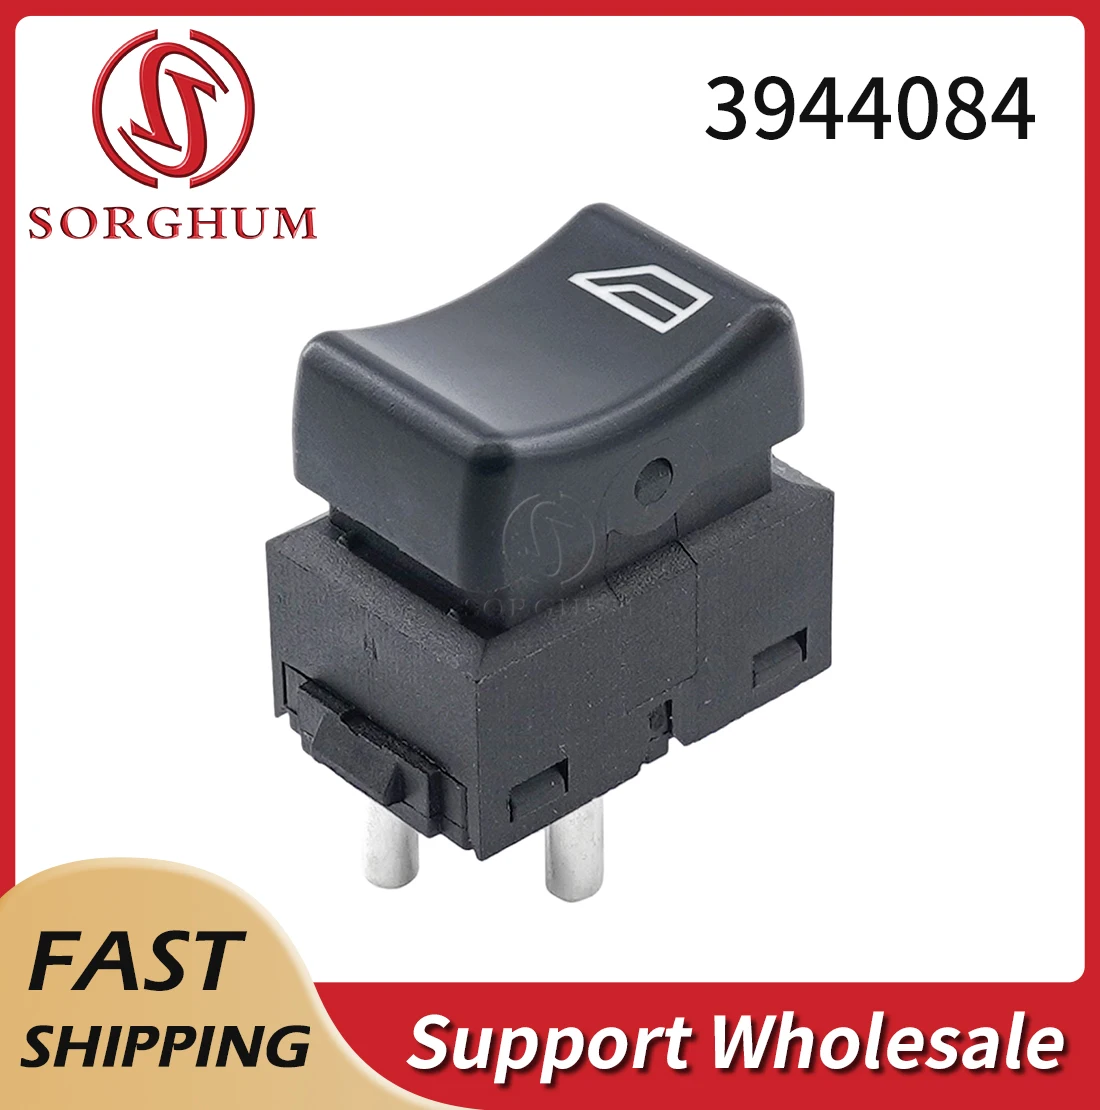 

Sorghum 3944084 Car Single Button Electric Power Window Control Switch For Volvo Truck 740 760 780 940 960 FH Fl 608 Fm 10 Nh Nl